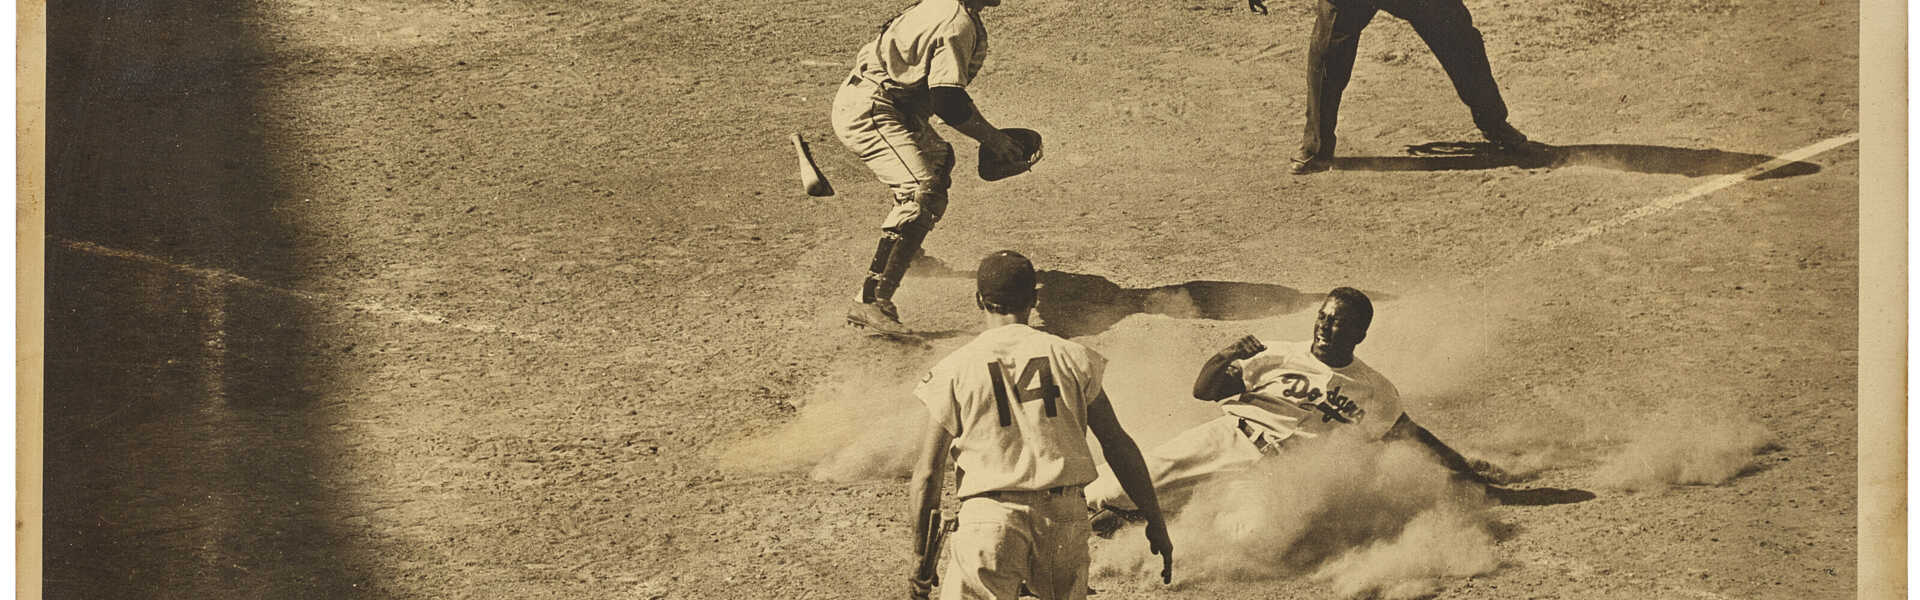 JACKIE ROBINSON "SAFE AT HOME" LARGE FORMAT PHOTOGRAPH C.1950S (PSA/DNA TYPE I)